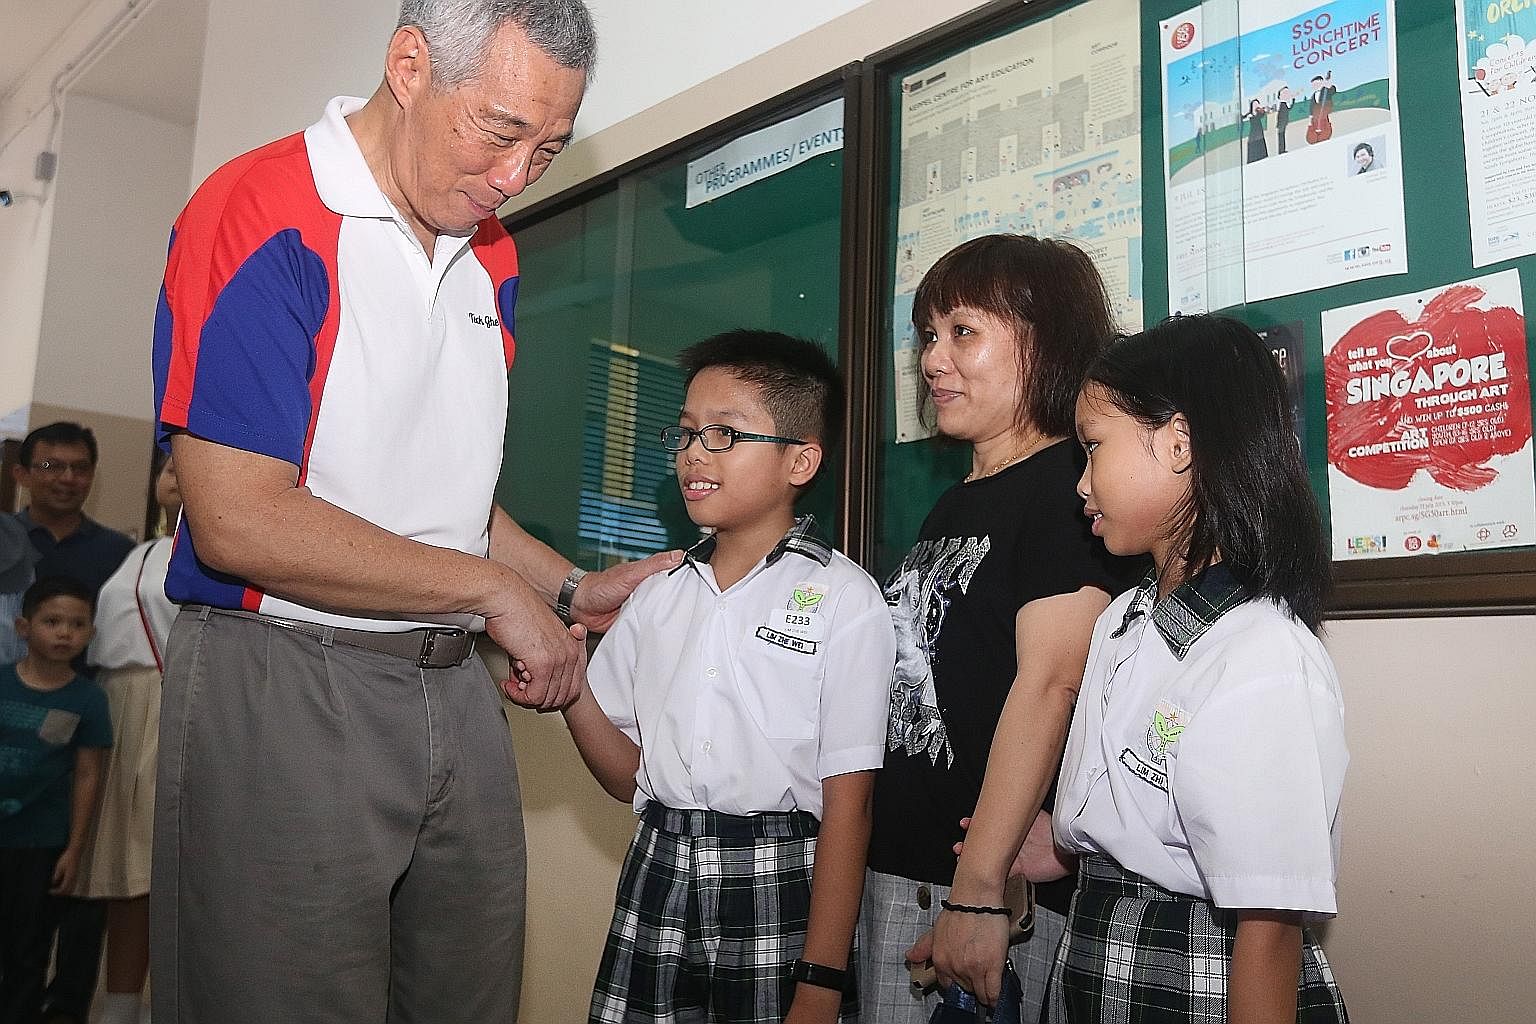 Prime Minister Lee Hsien Loong congratulating Edusave Award recipient Lim Zhe Wei from Teck Ghee Primary School, who is accompanied by his mother Feng Biao Mei and sister Lim Zhi Yi.